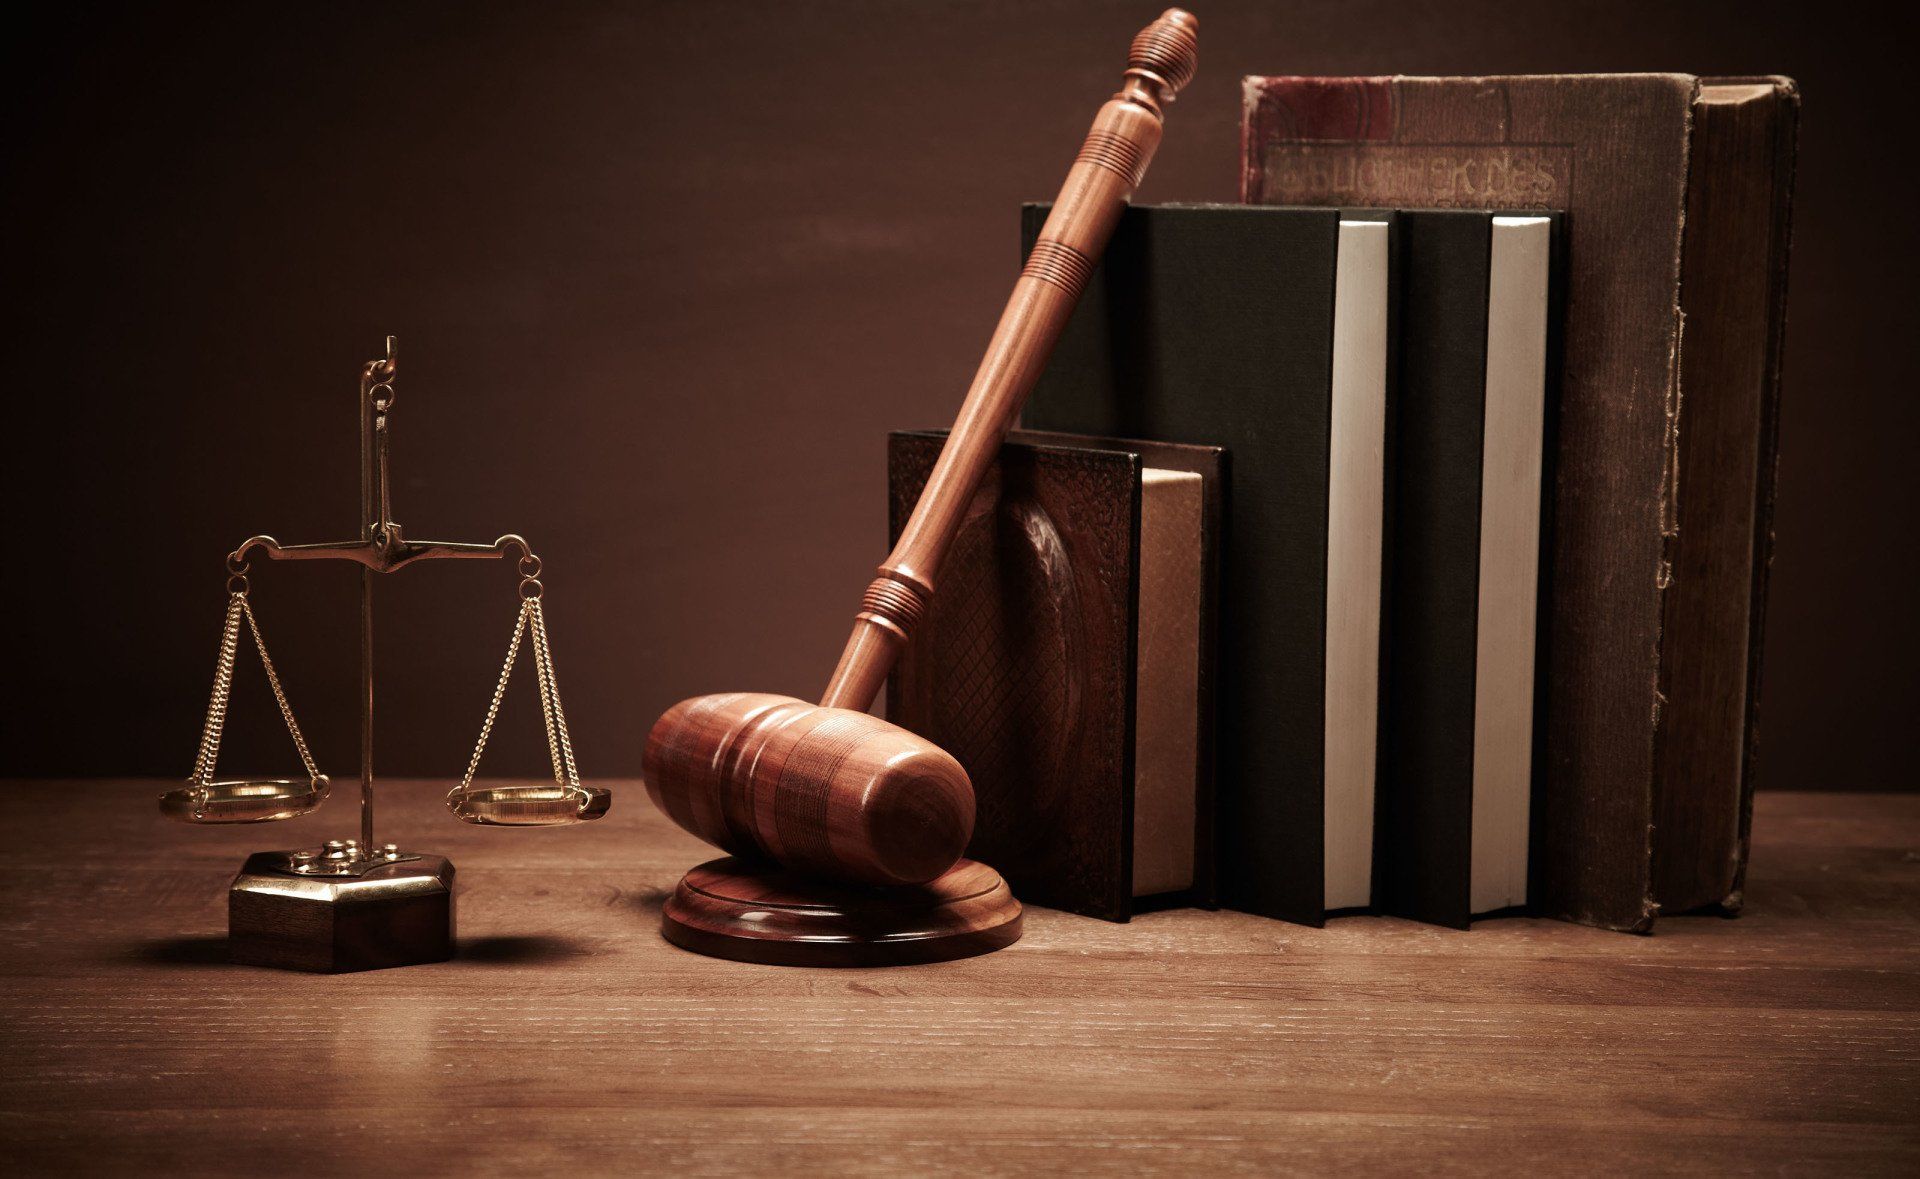 Law book and gavel